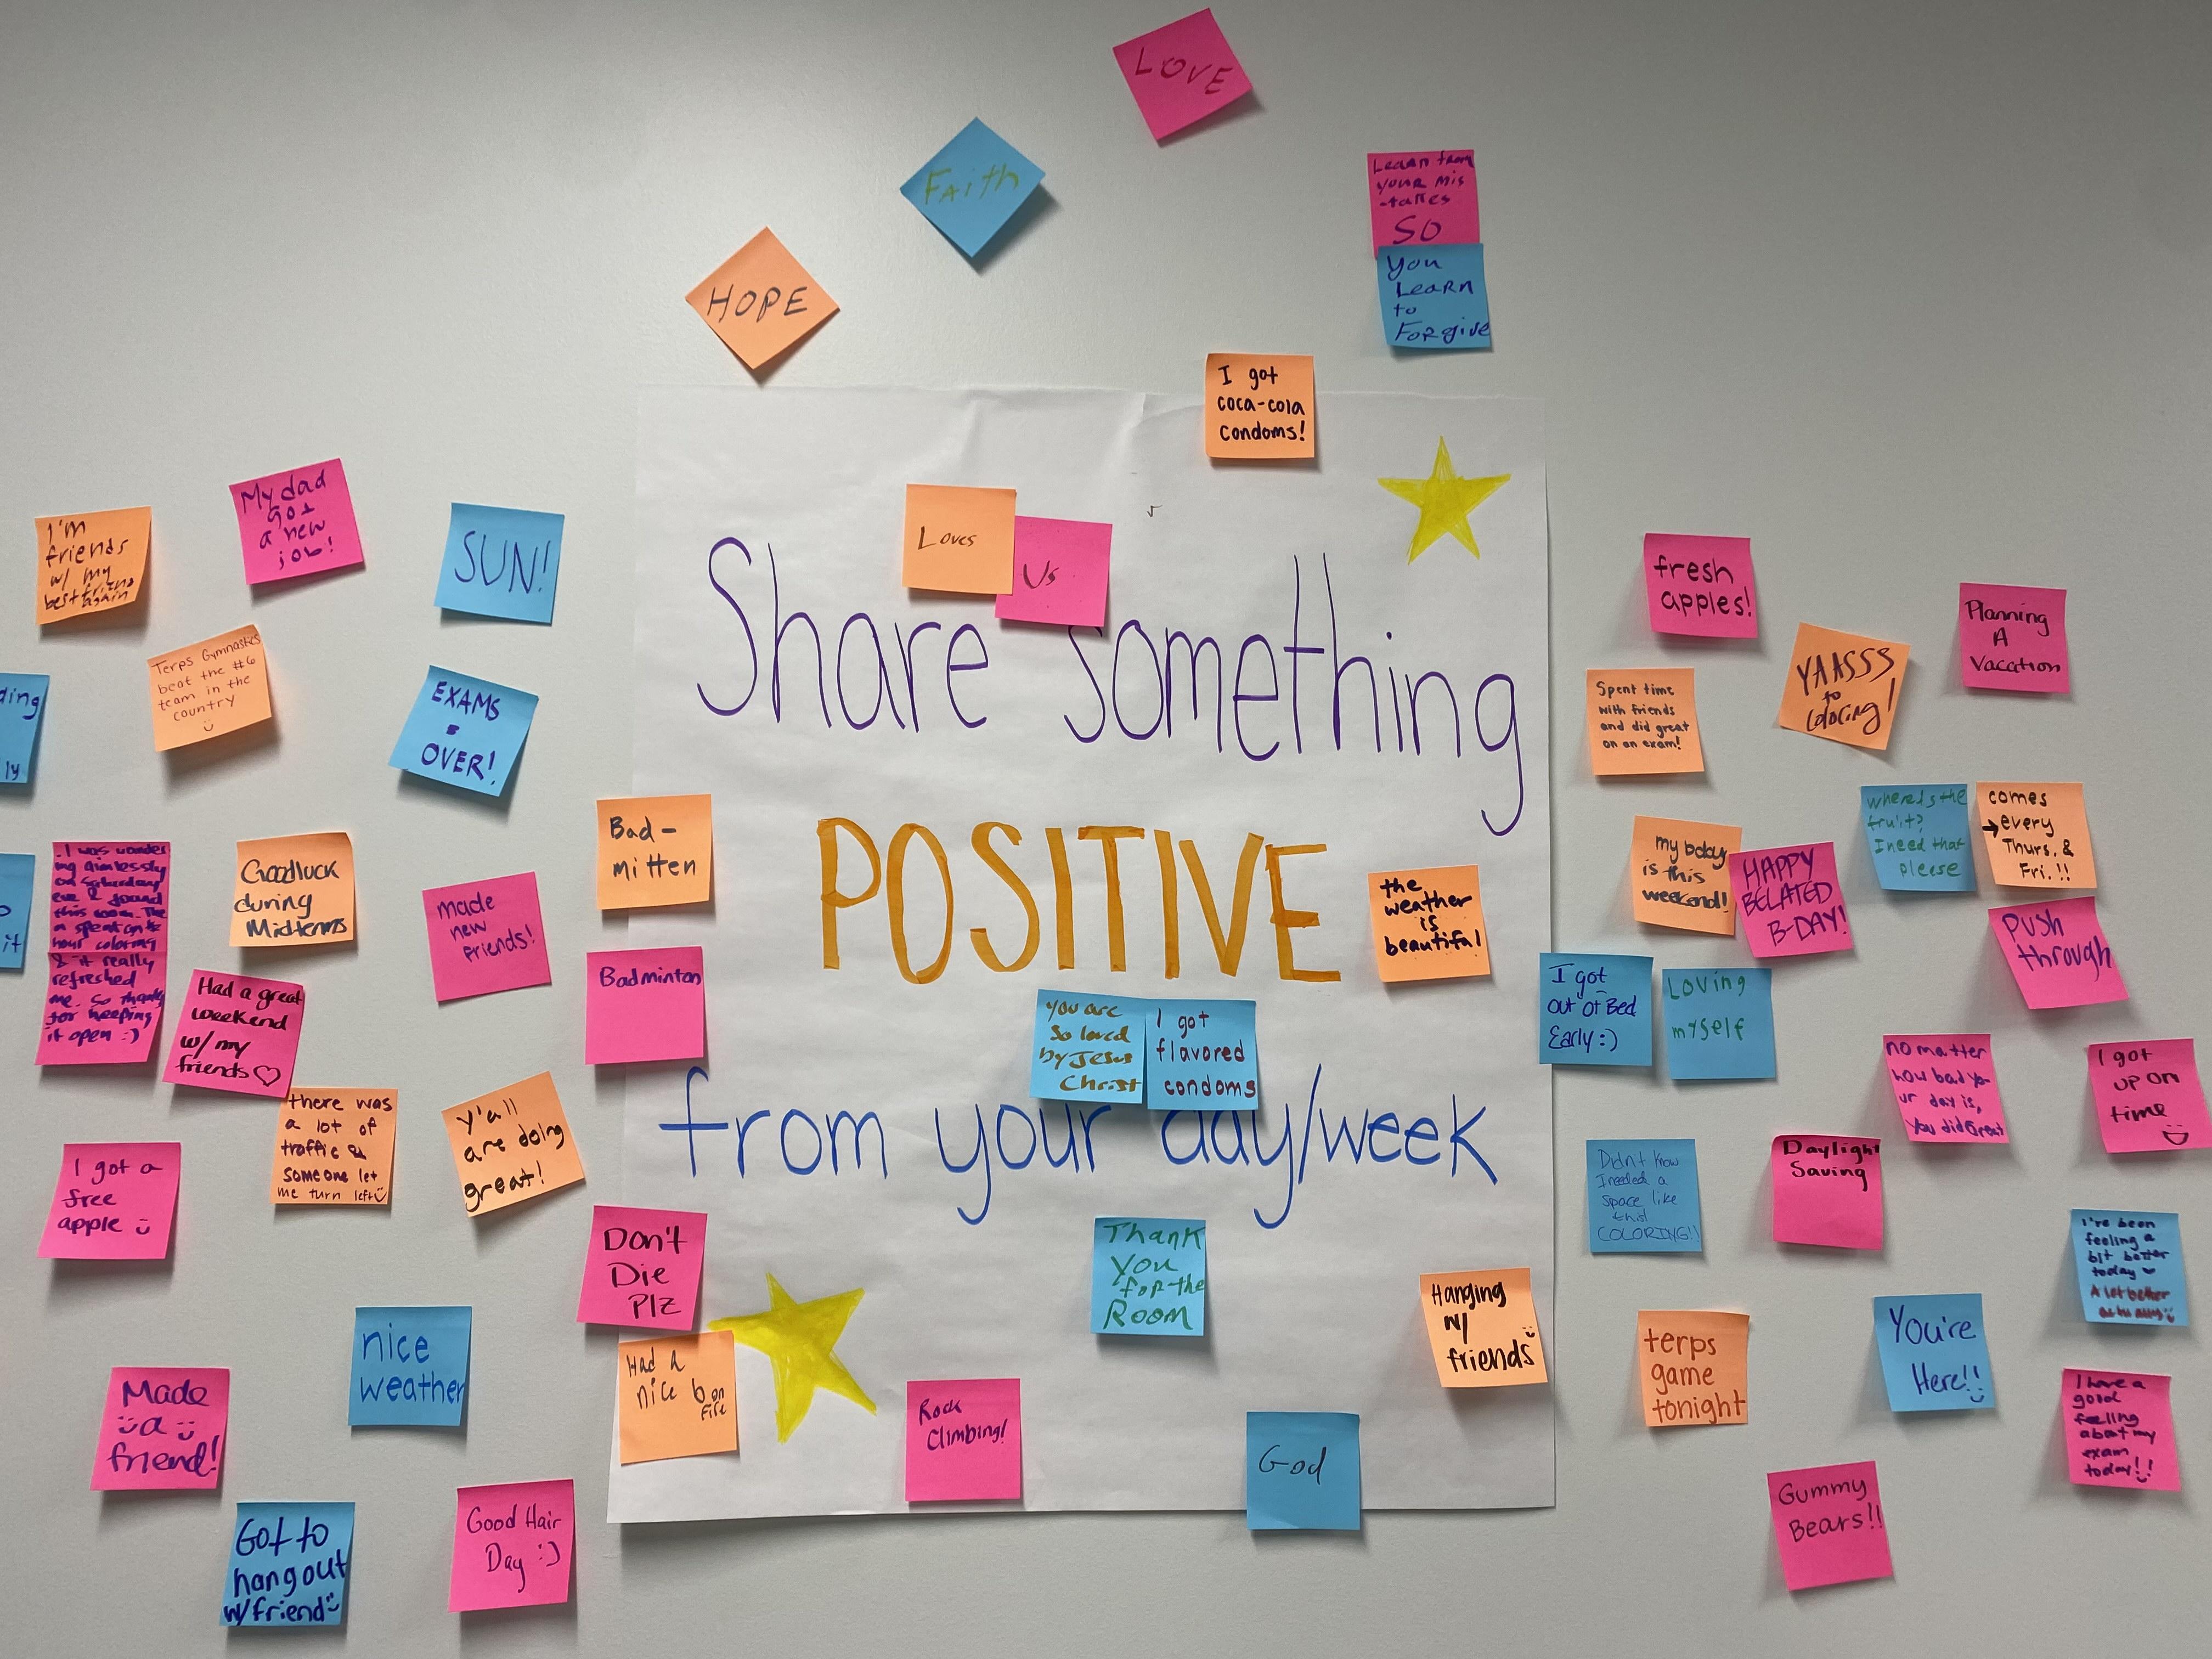 Sign stating "share something positive" and surrounded by post-it notes.